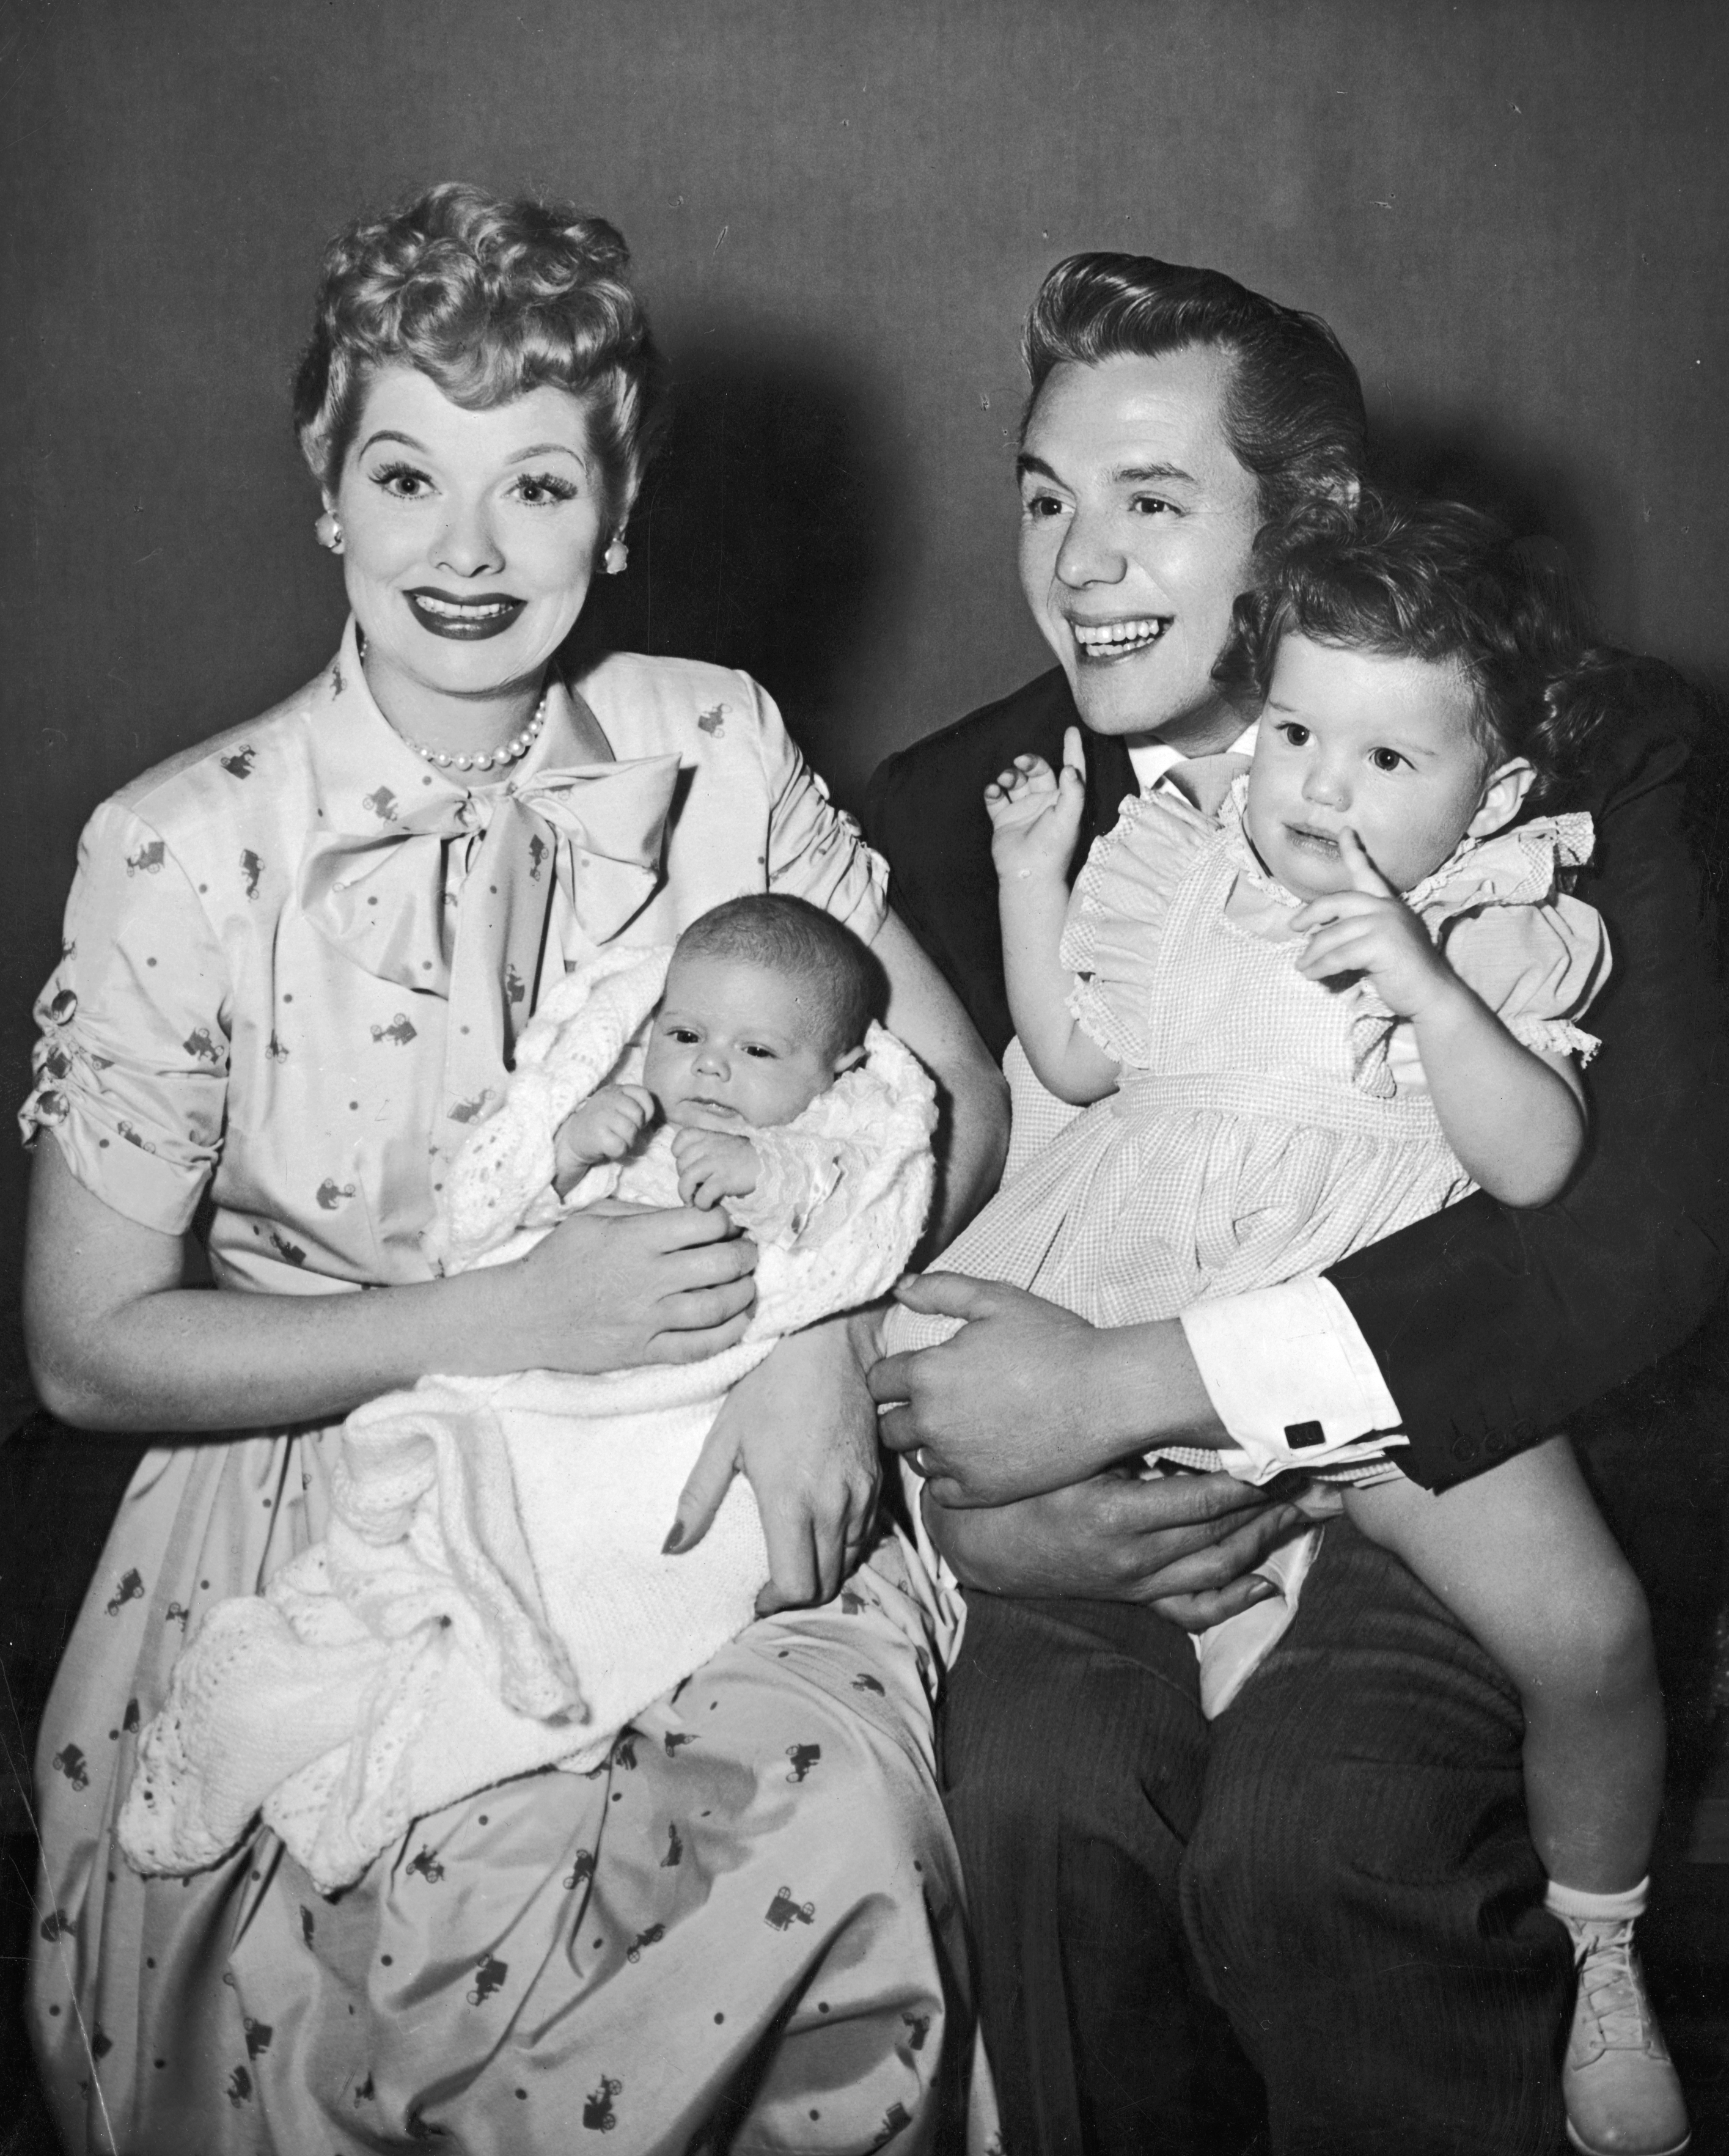 Lucille Ball, Desi Arnaz, and their children, Desi Jr. and Lucie, circa 1953 | Source: Getty Images